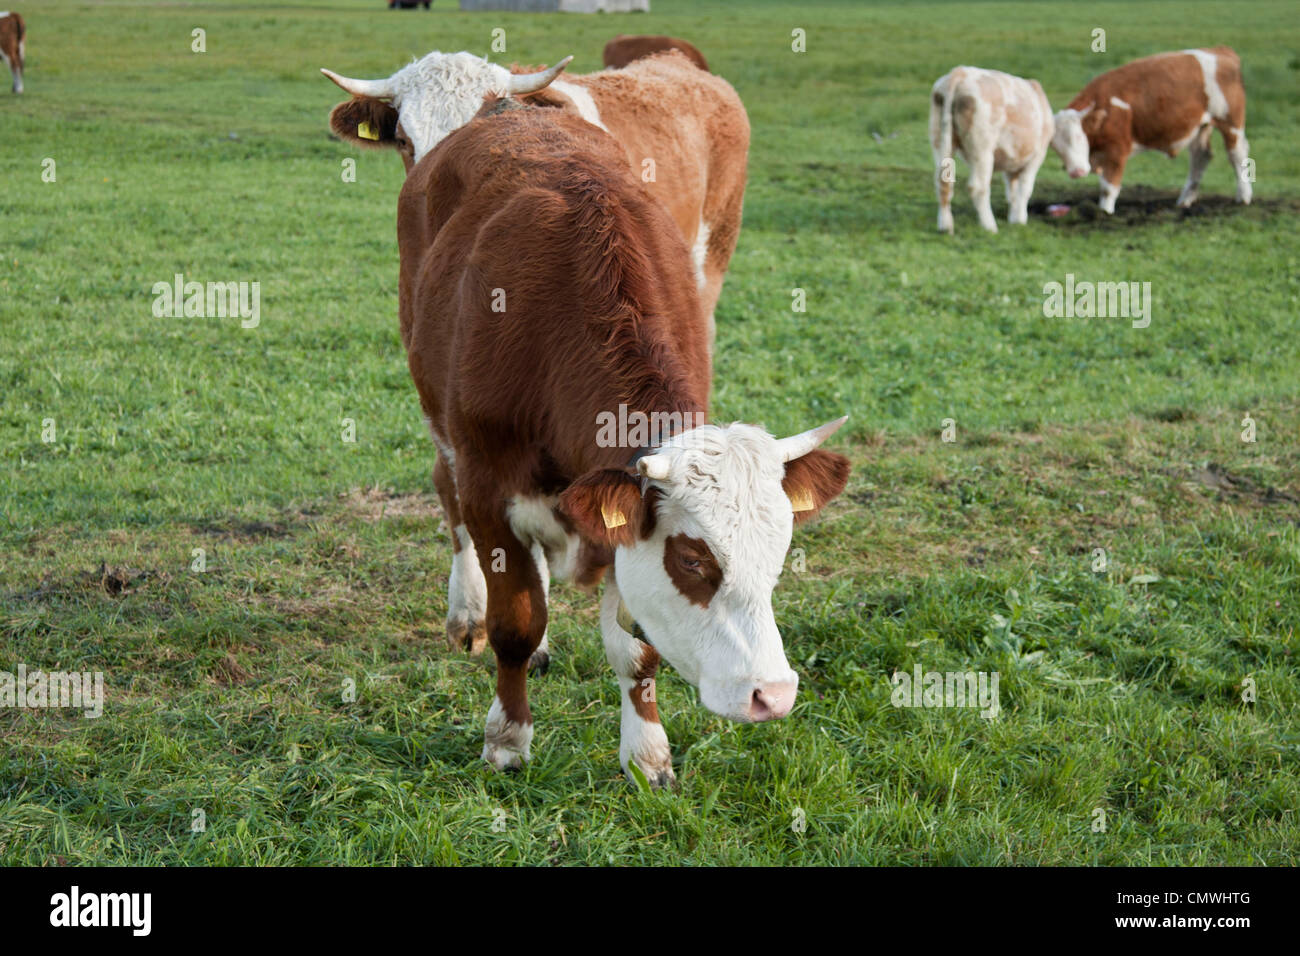 Cows grazing in an open field Stock Photo